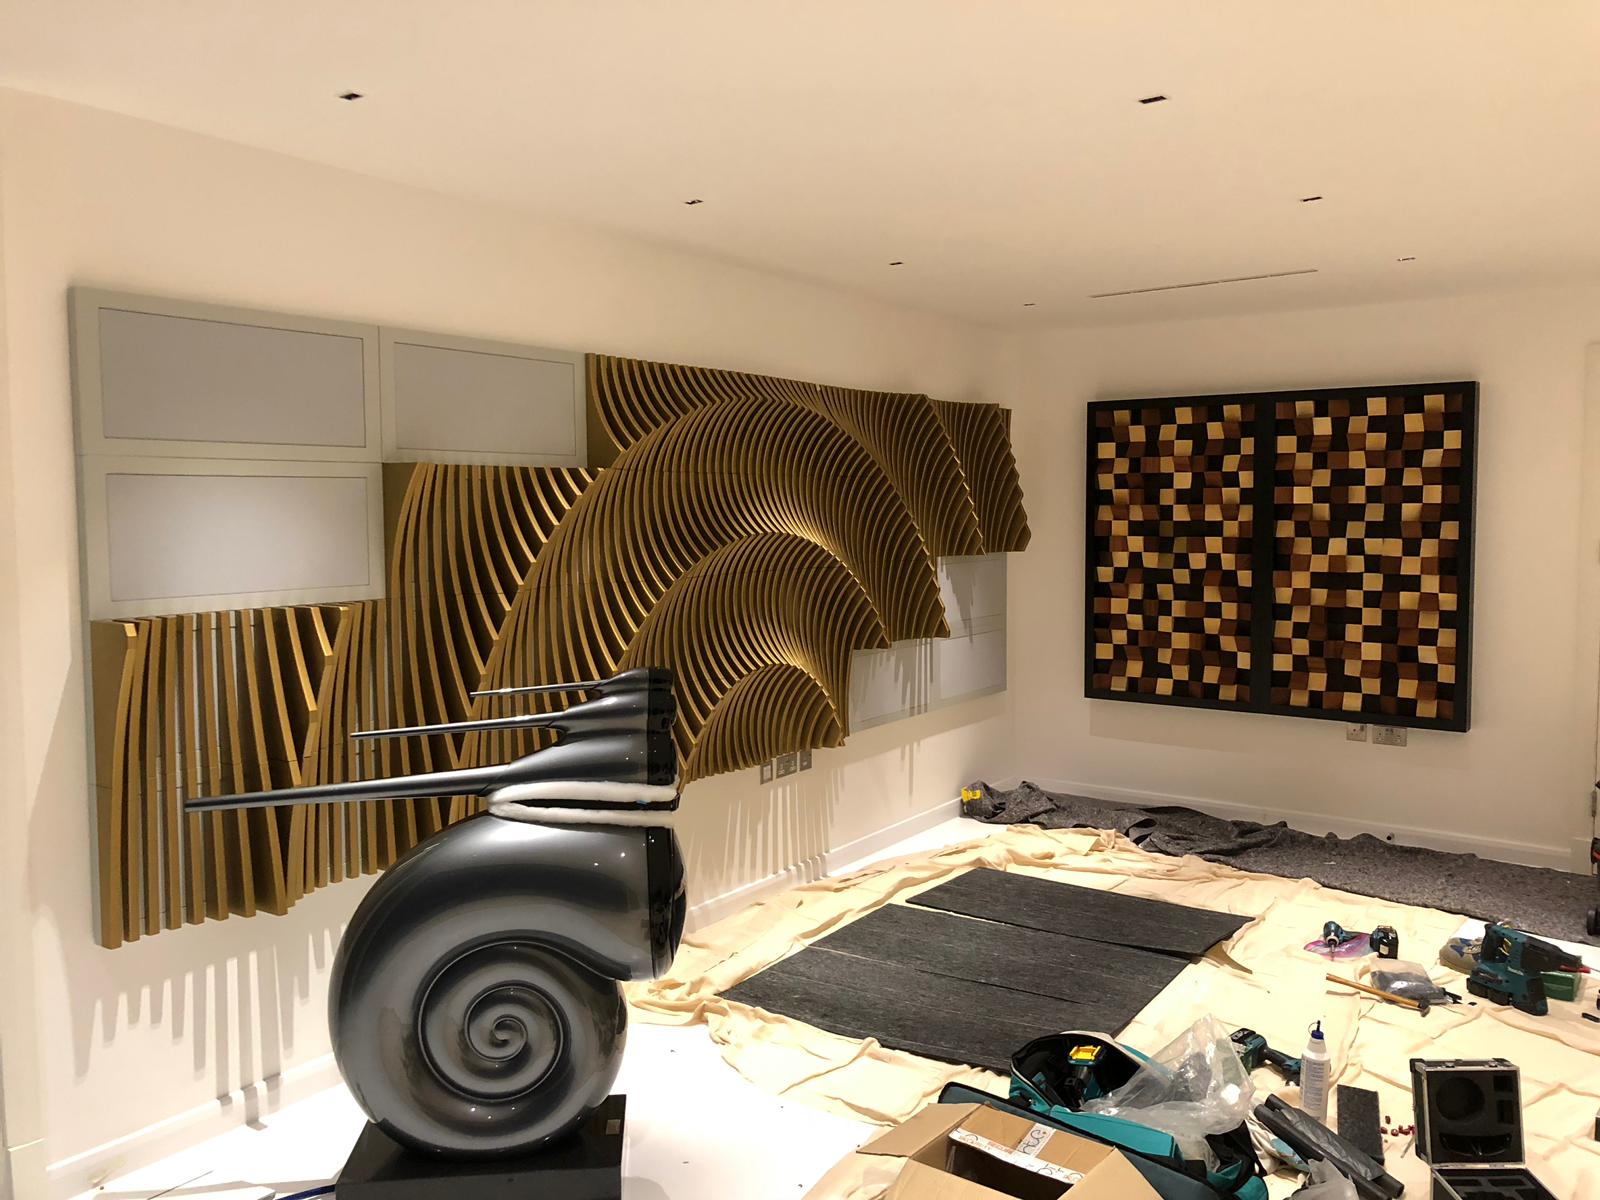 Shows installation of acoustic room treatment in ammonite room, with B&W Nautillus speaker.